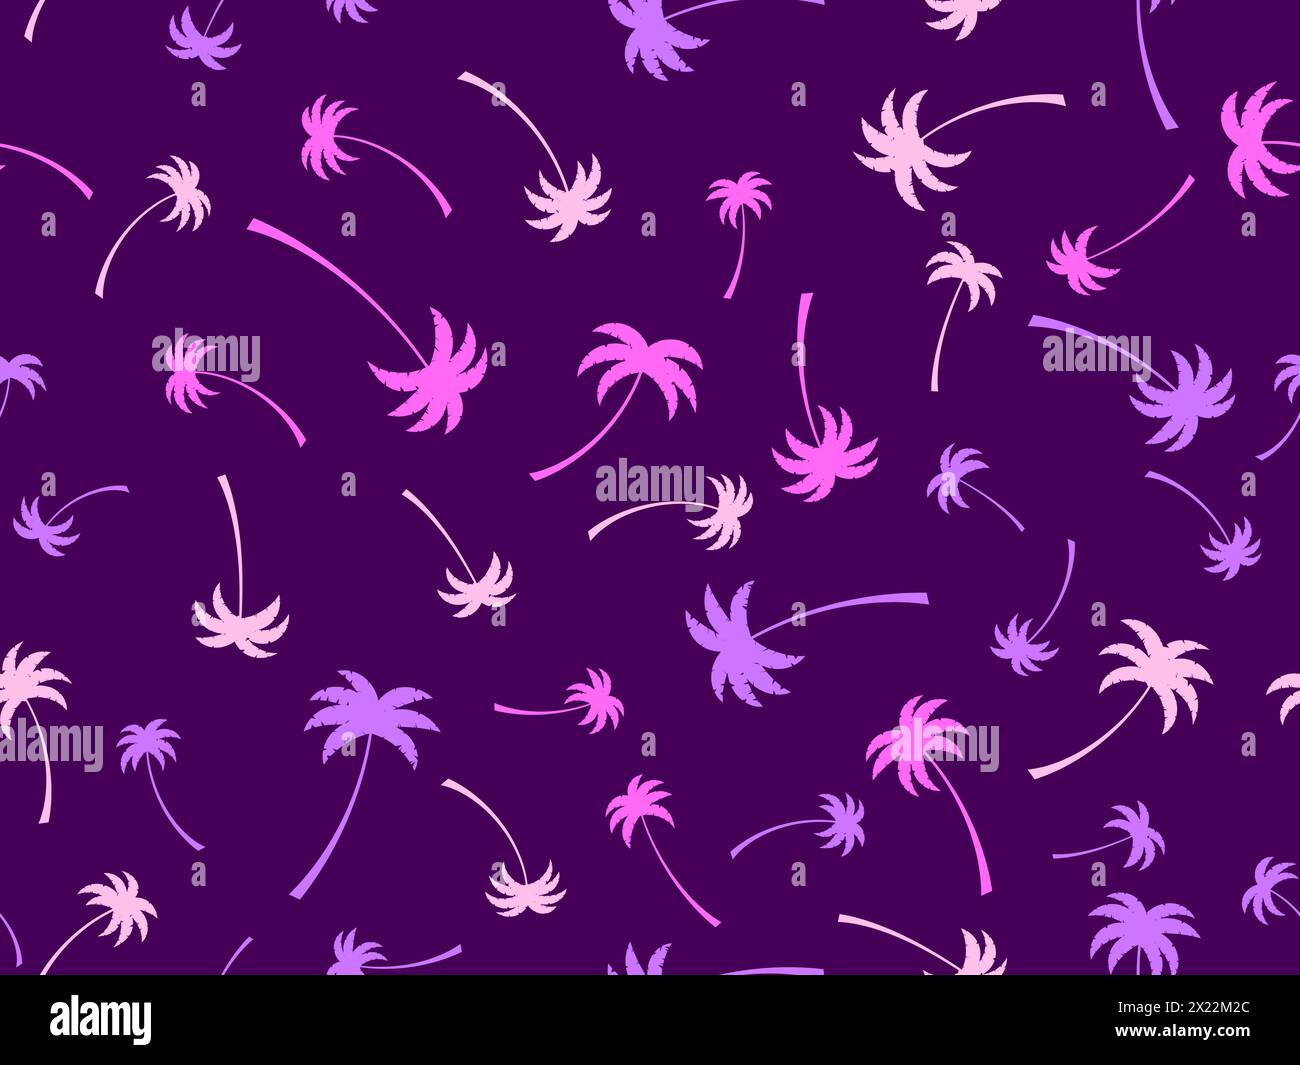 Colorful palm trees seamless pattern.  Summer time, wallpaper with tropical palm trees pattern. Design for printing t-shirts, banners and promotional Stock Vector